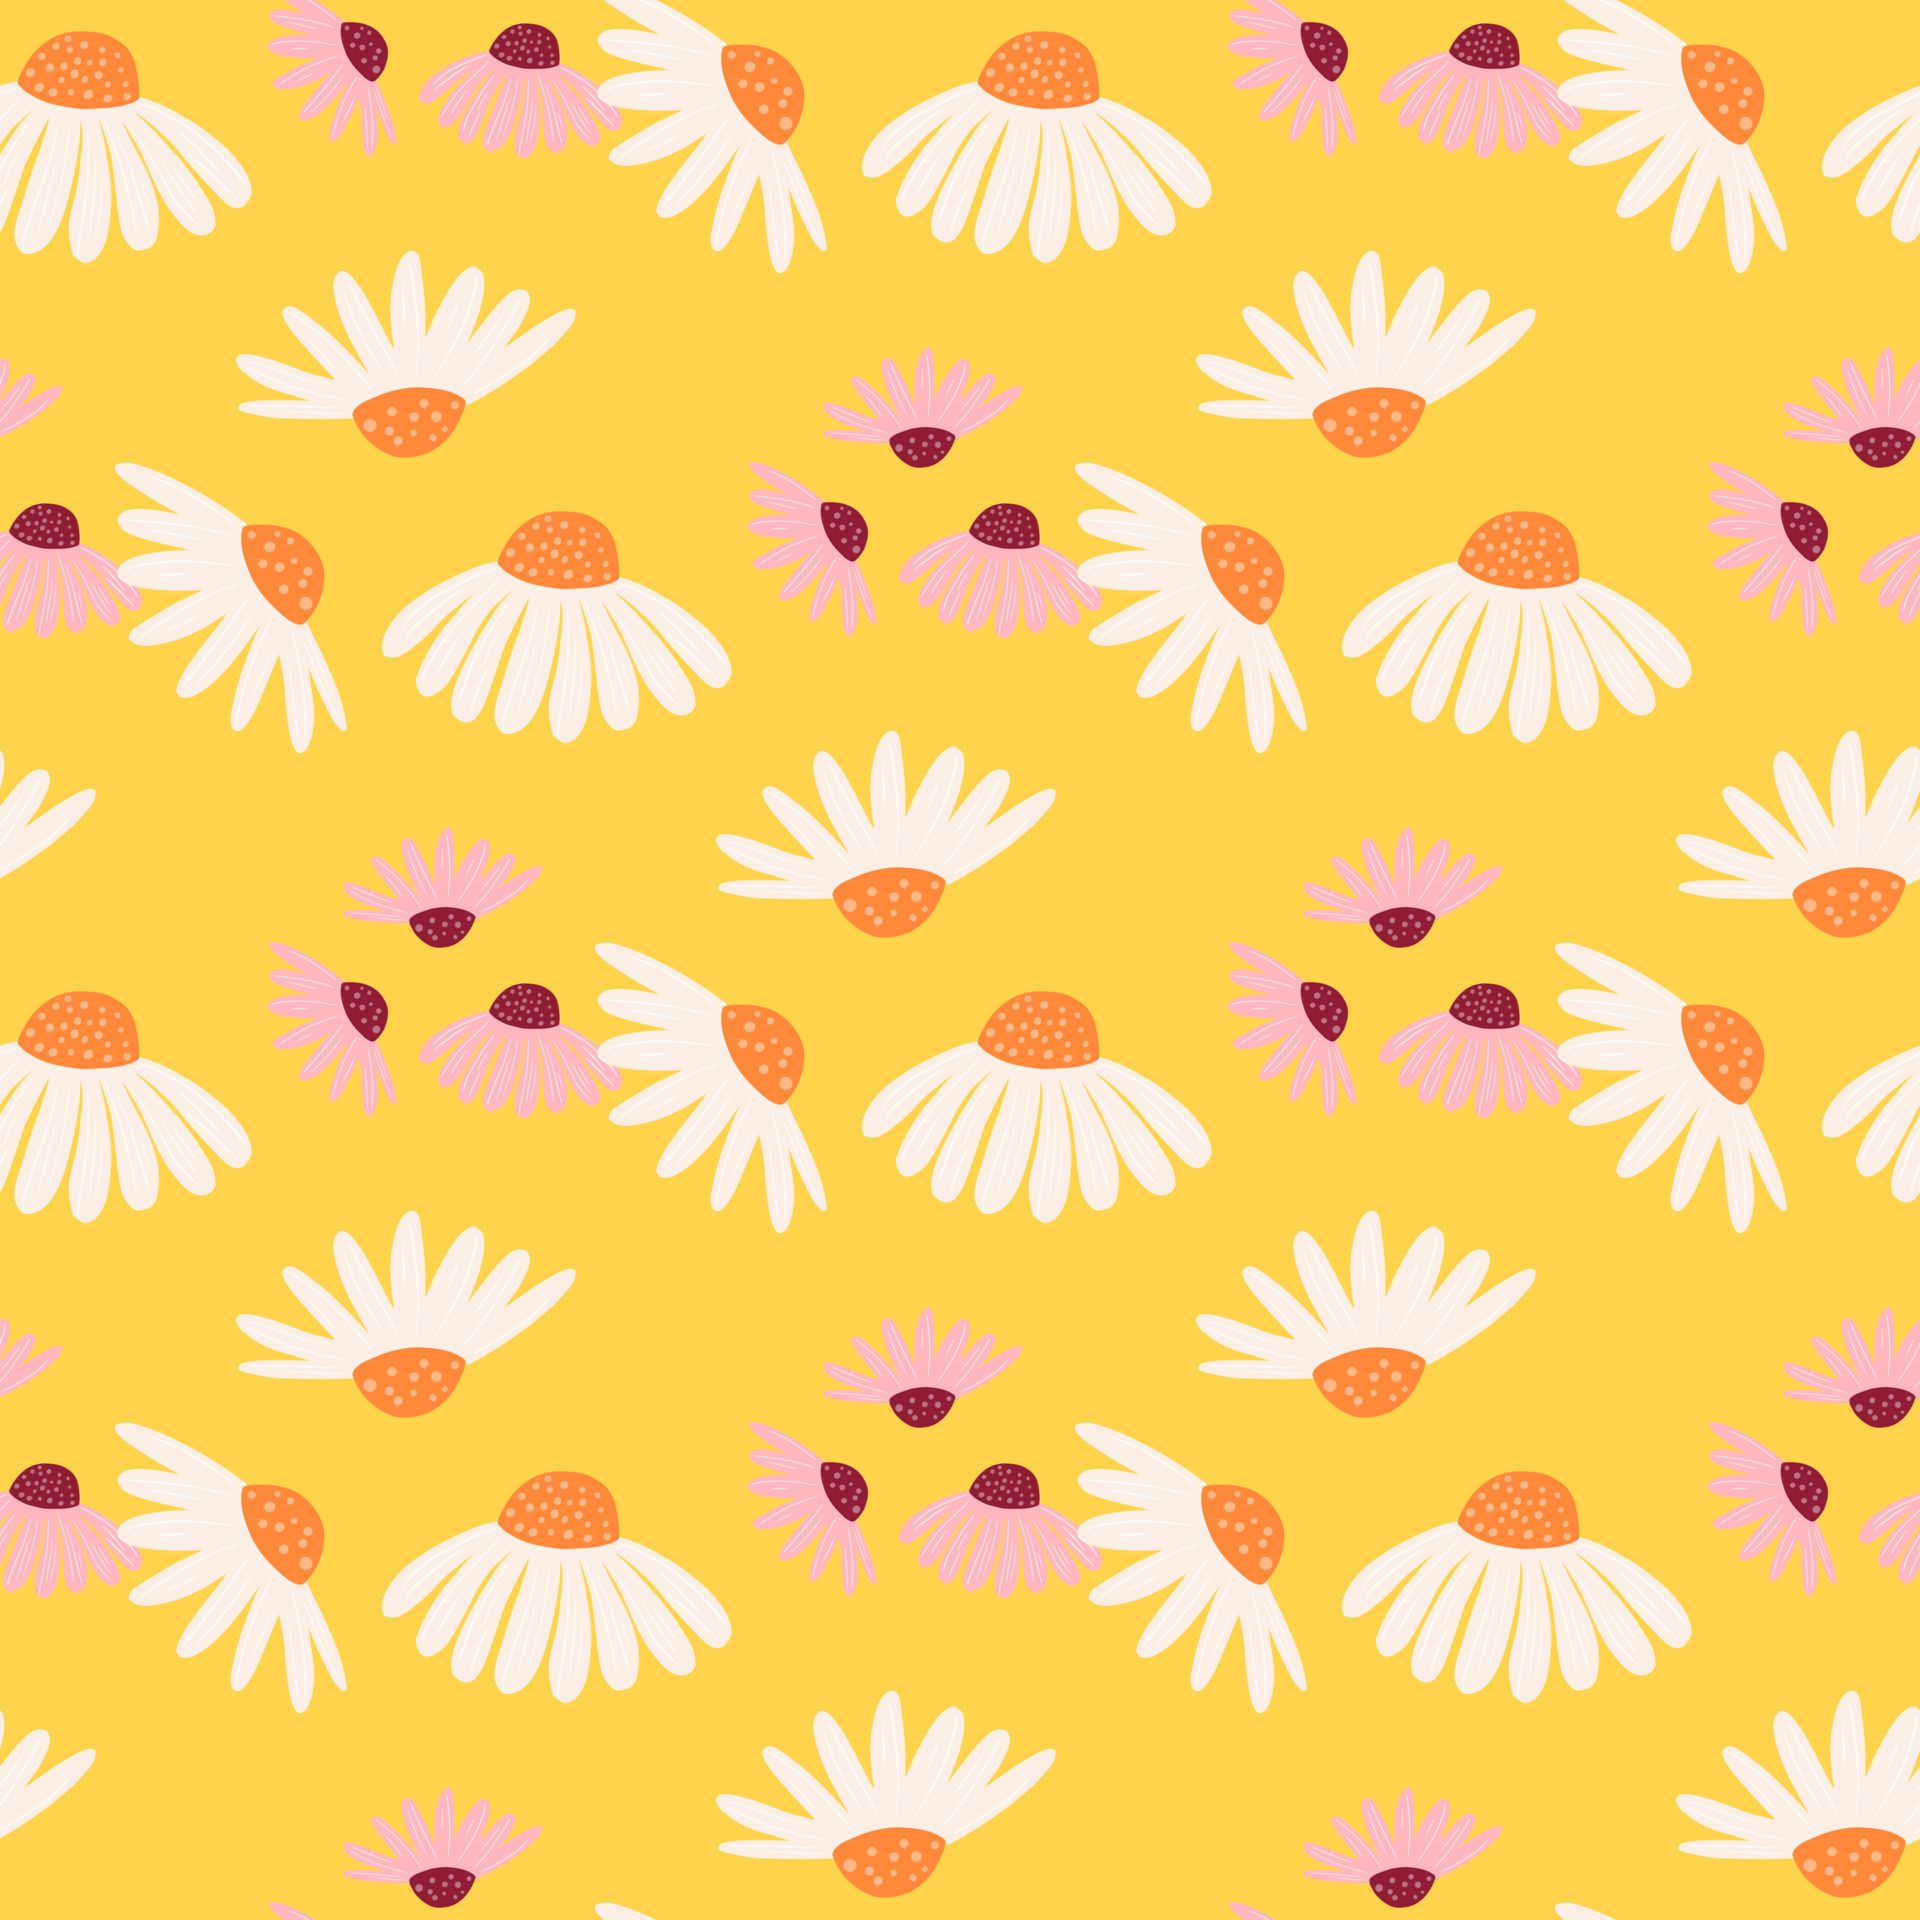 Nature seamless pattern with white and pink meadow daisy flowers ornament. Bright yellow background